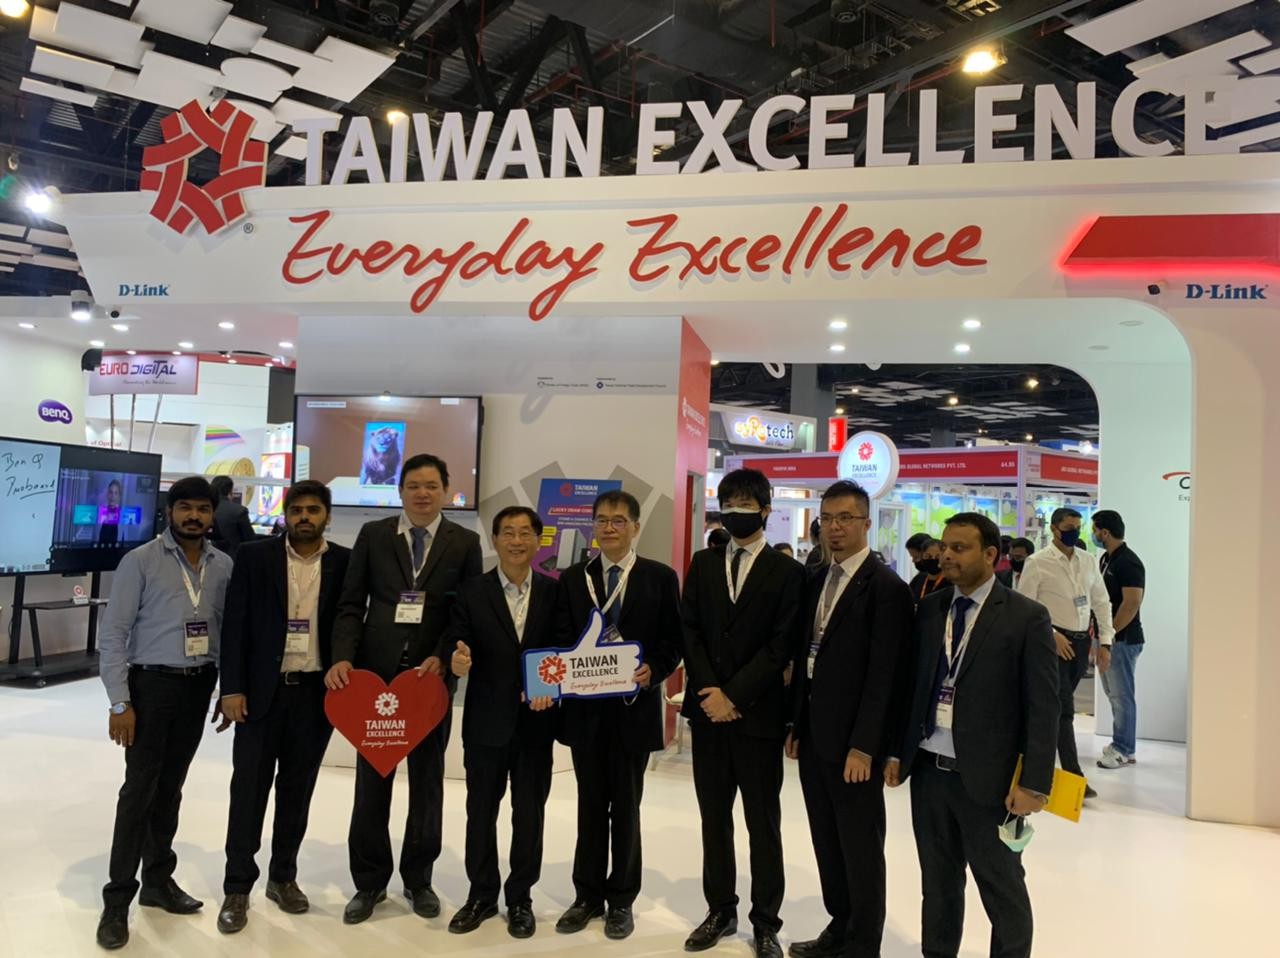 taiwan excellence - official